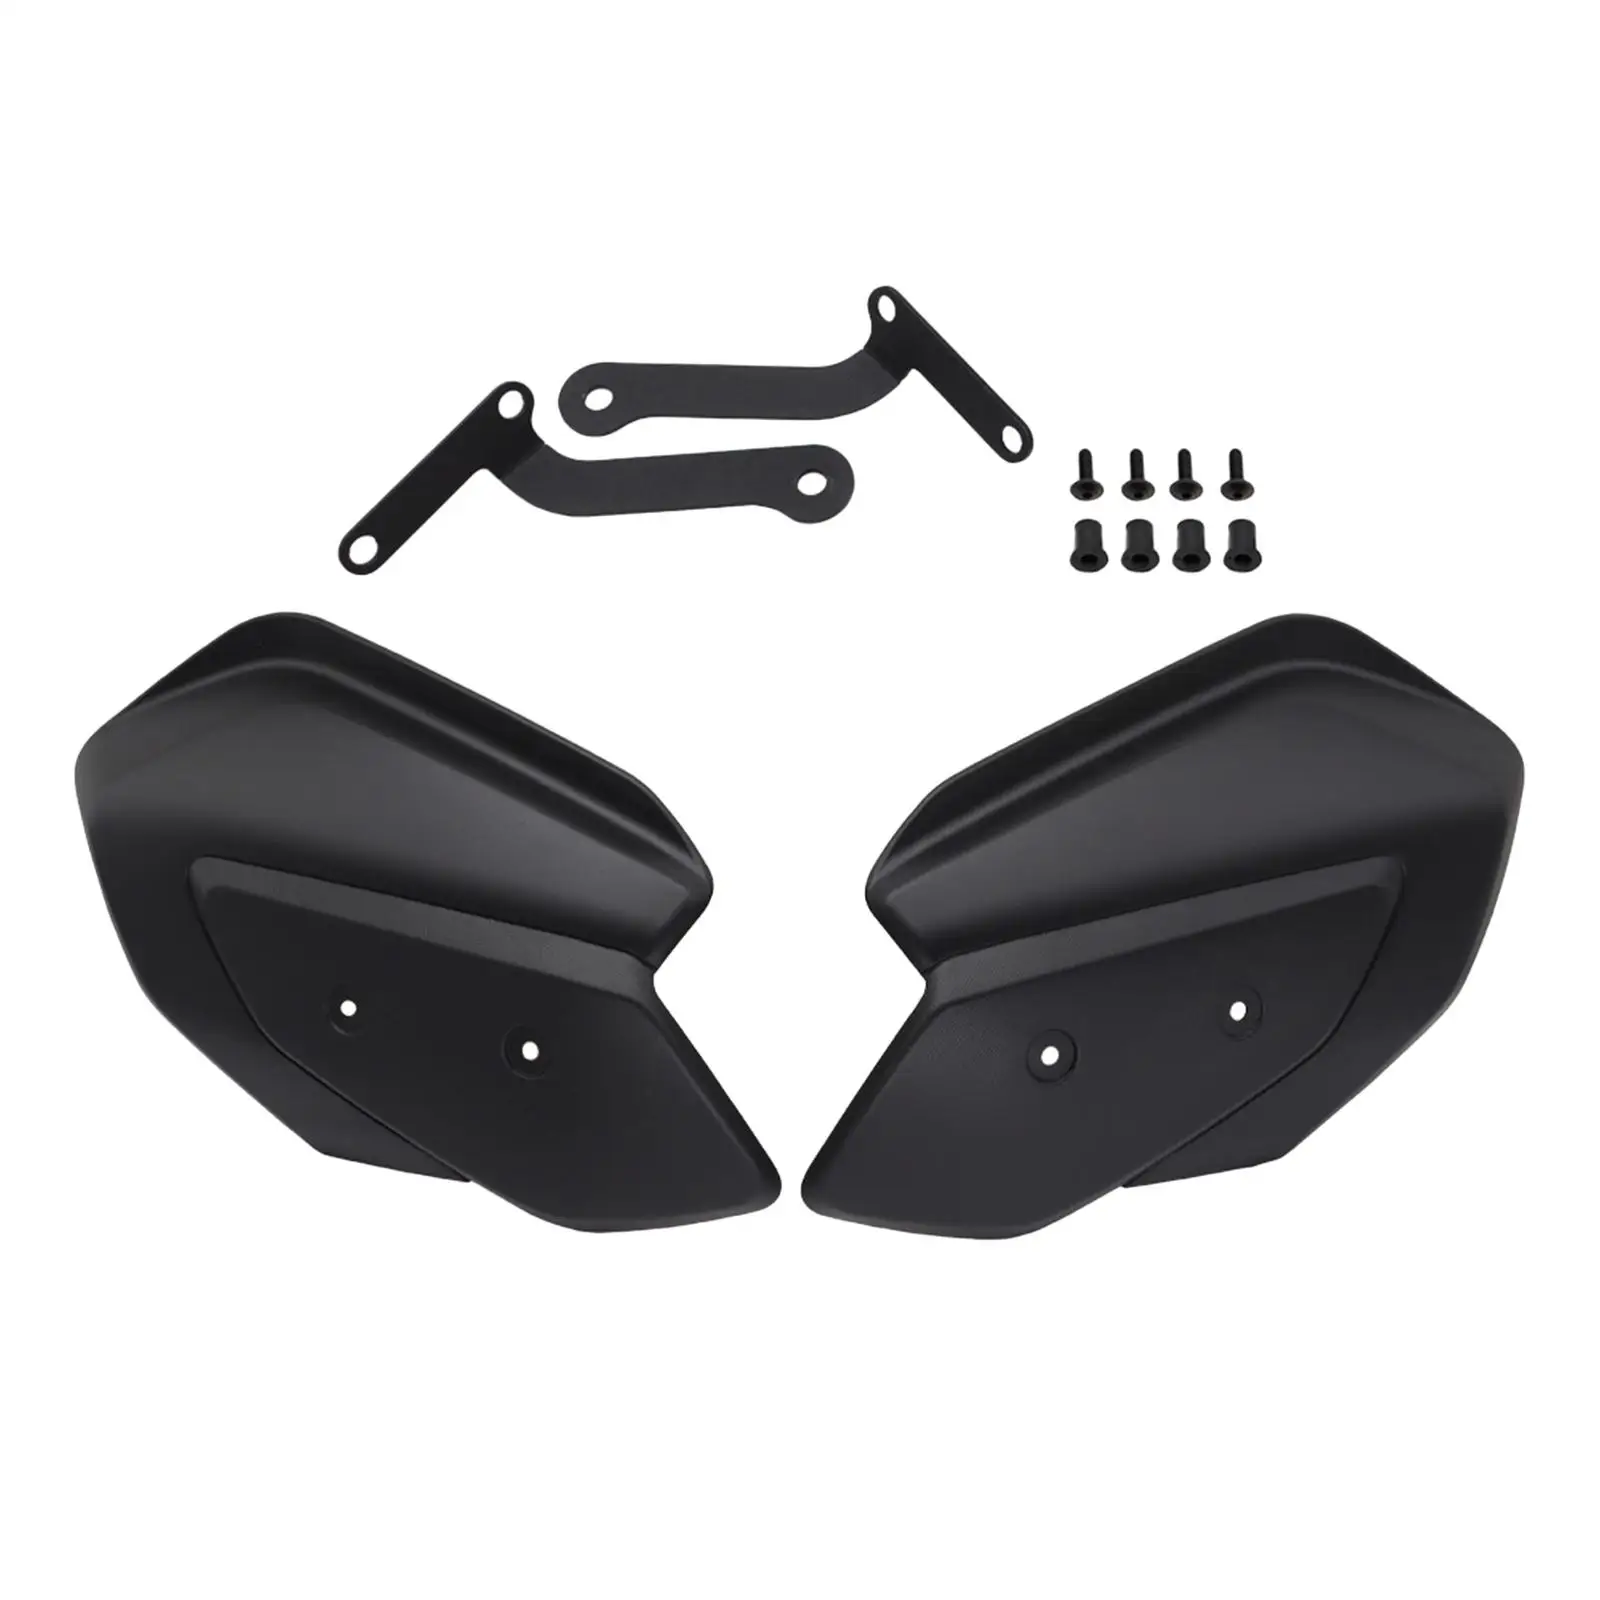 2 Pieces Motorcycle Handguards Protectors for Xmax 300 Durable Convenient Installation Replacement Motorcycle Spare Parts